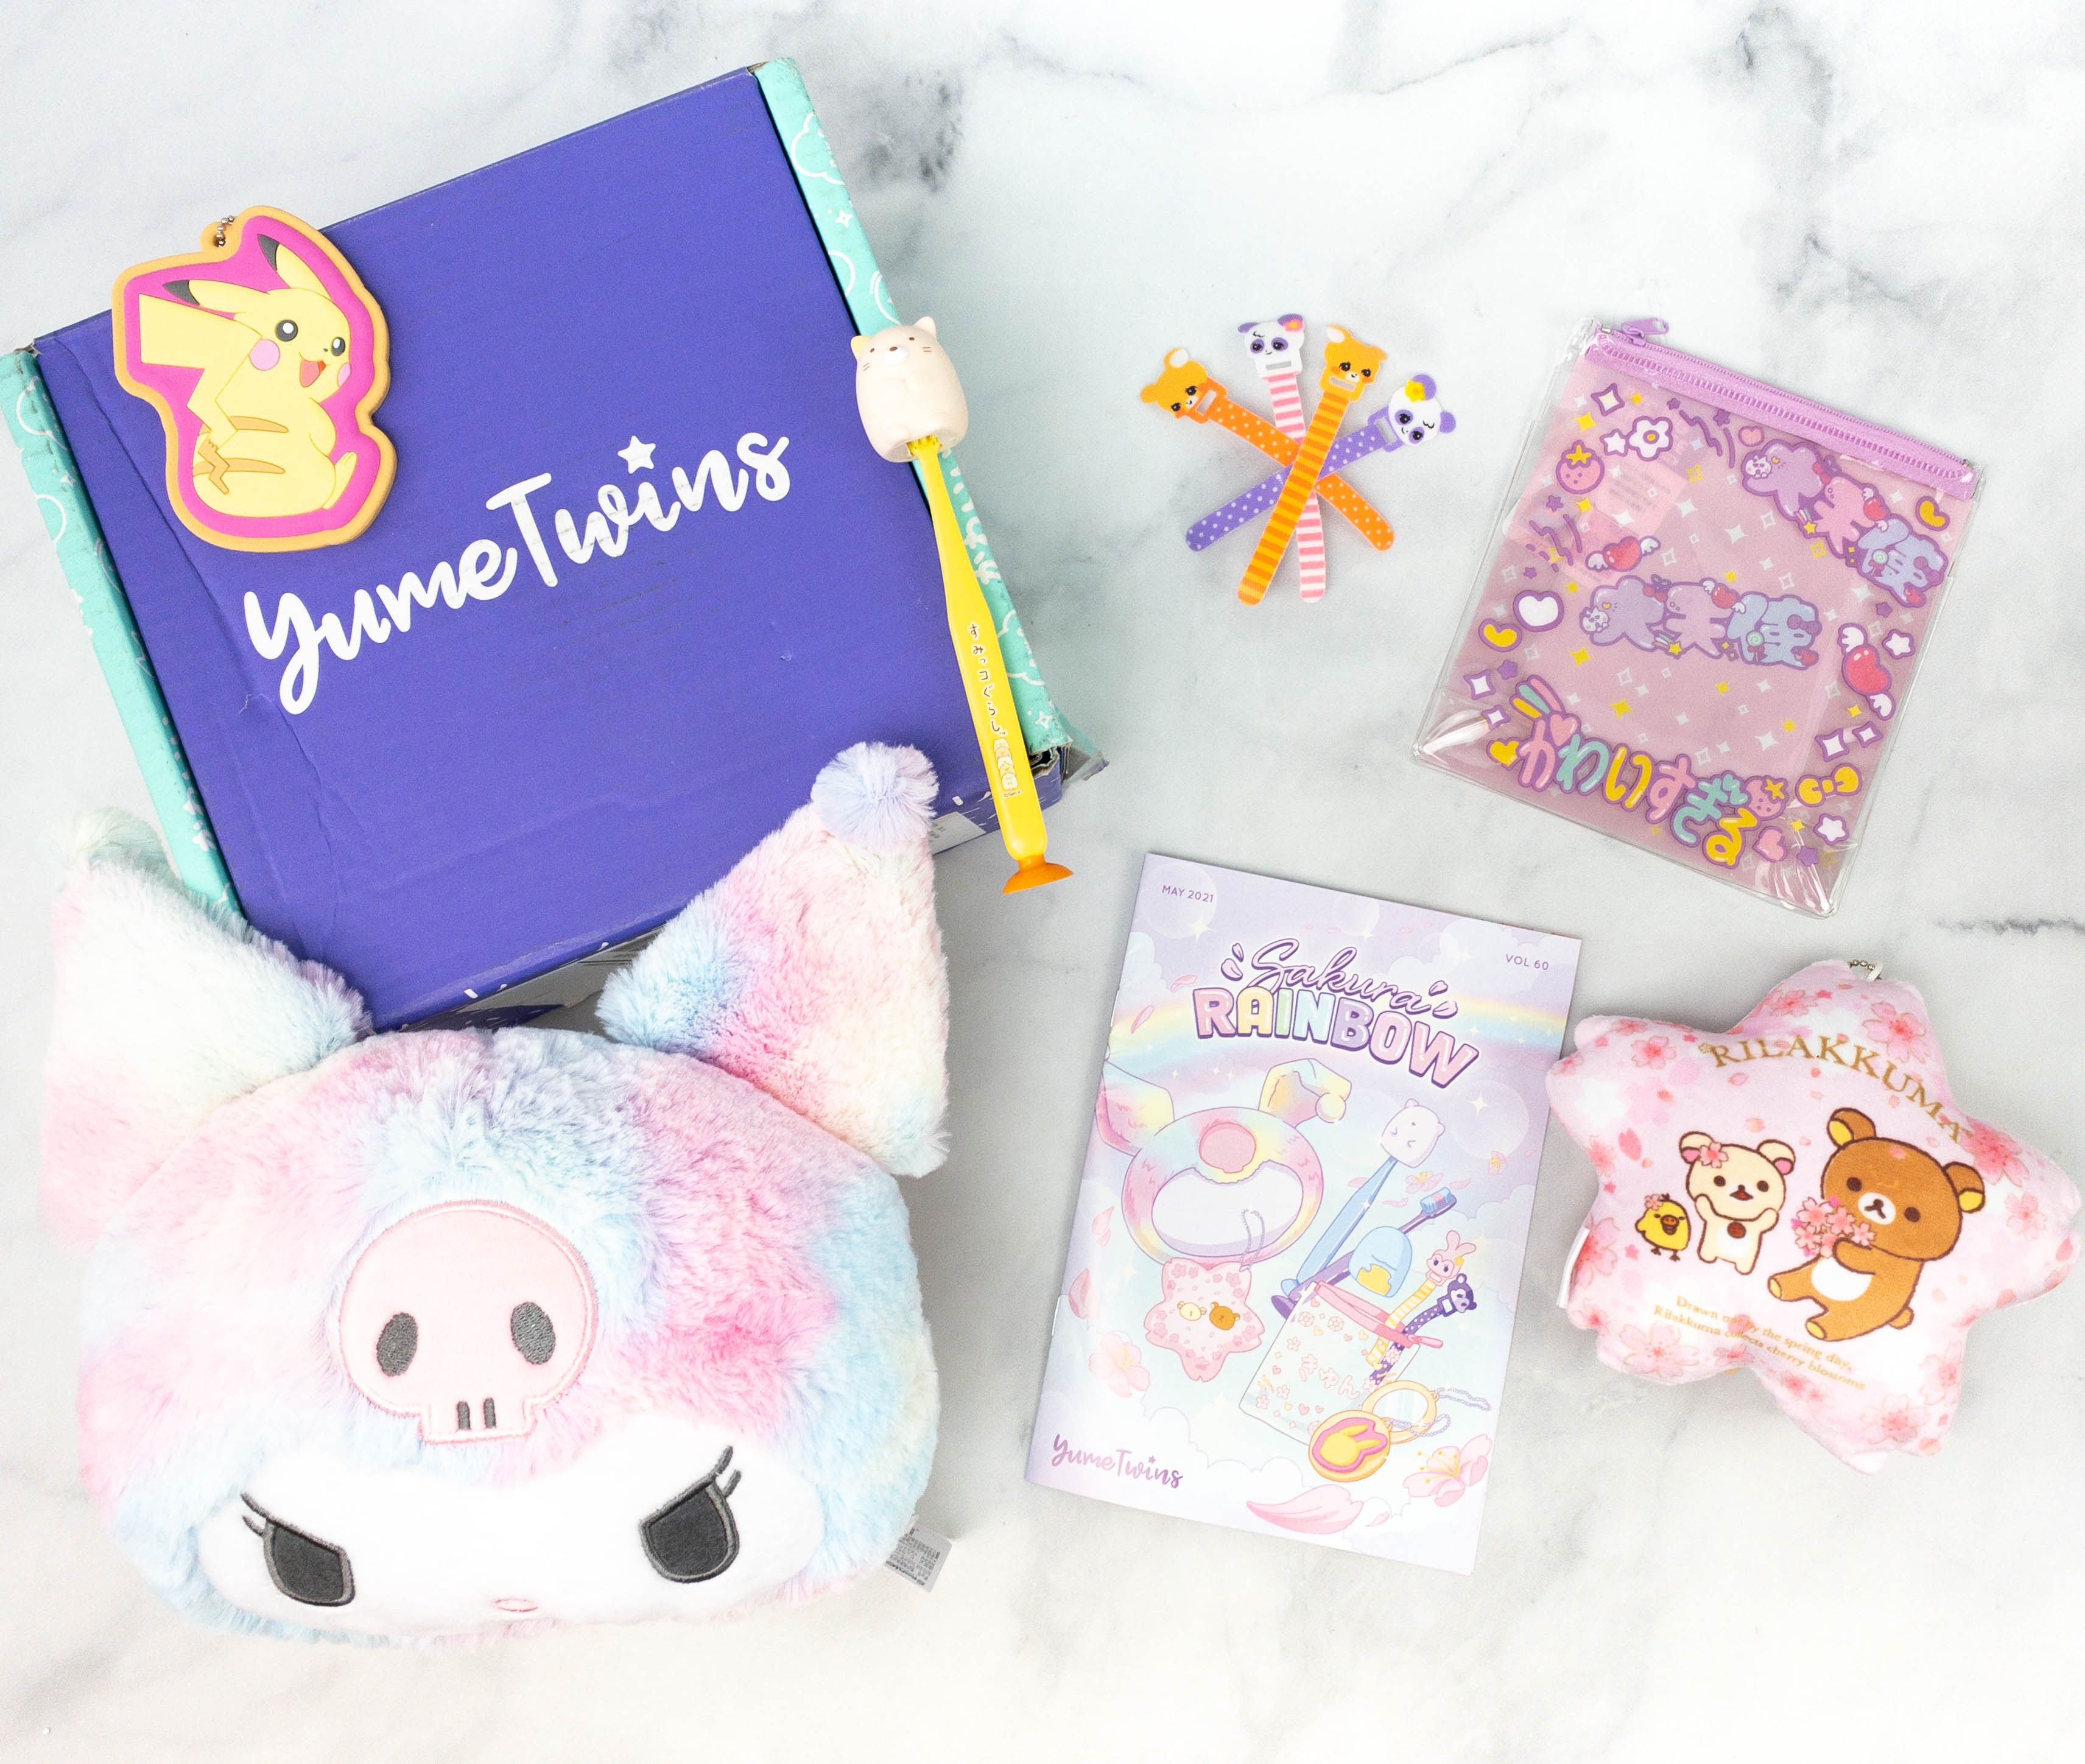 10 Kawaii Items You Can Buy at Daiso! - YumeTwins: The Monthly